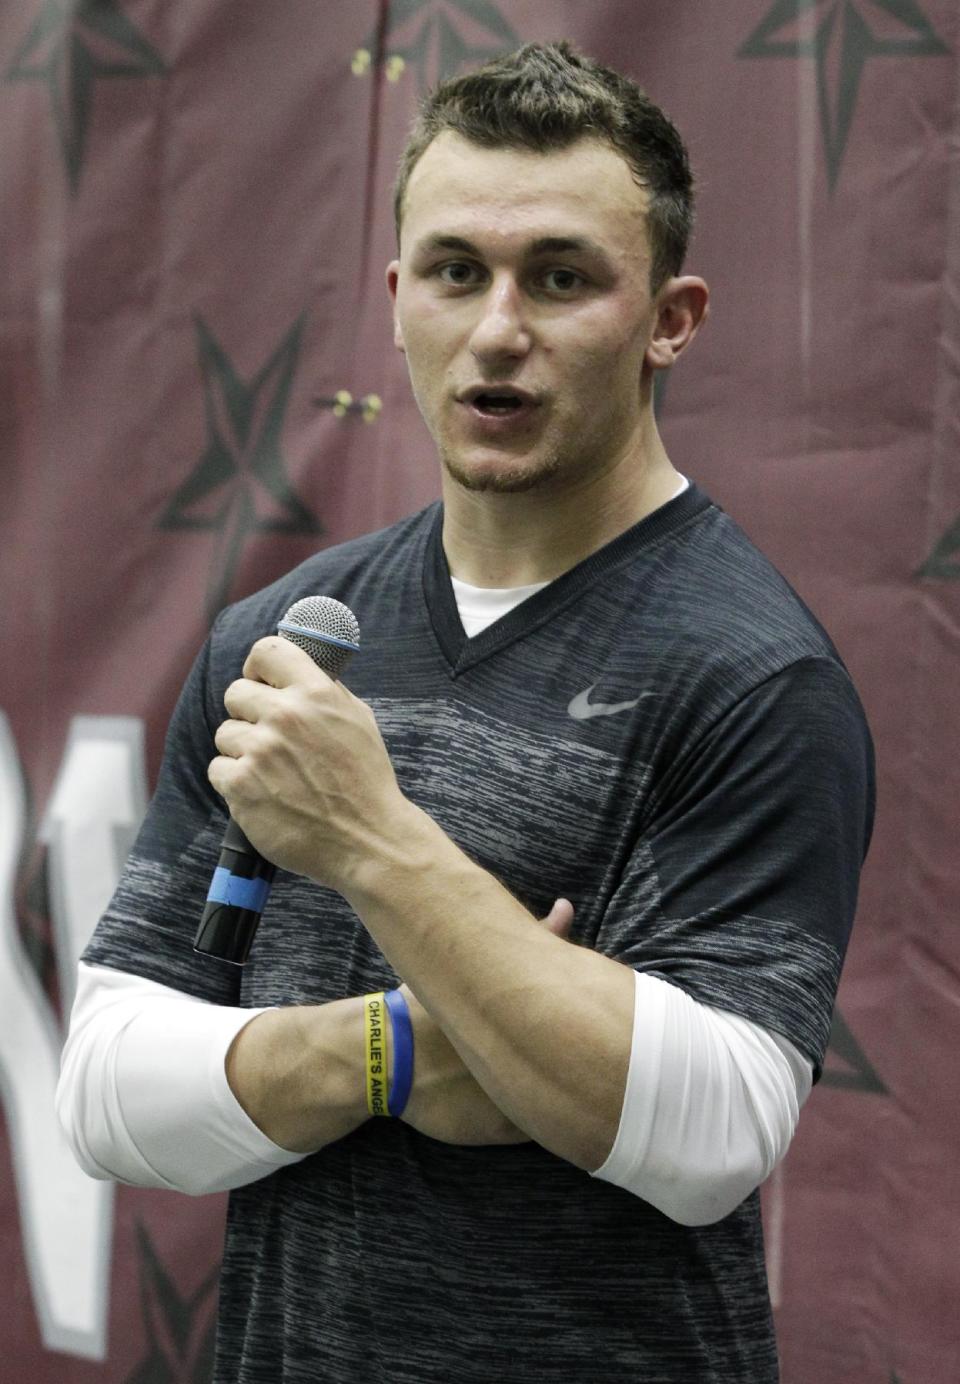 Texas A&M quarterback Johnny Manziel talks to members of the media during pro day for NFL football representatives in College Station, Texas, Thursday, March 27, 2014. (AP Photo/Patric Schneider)